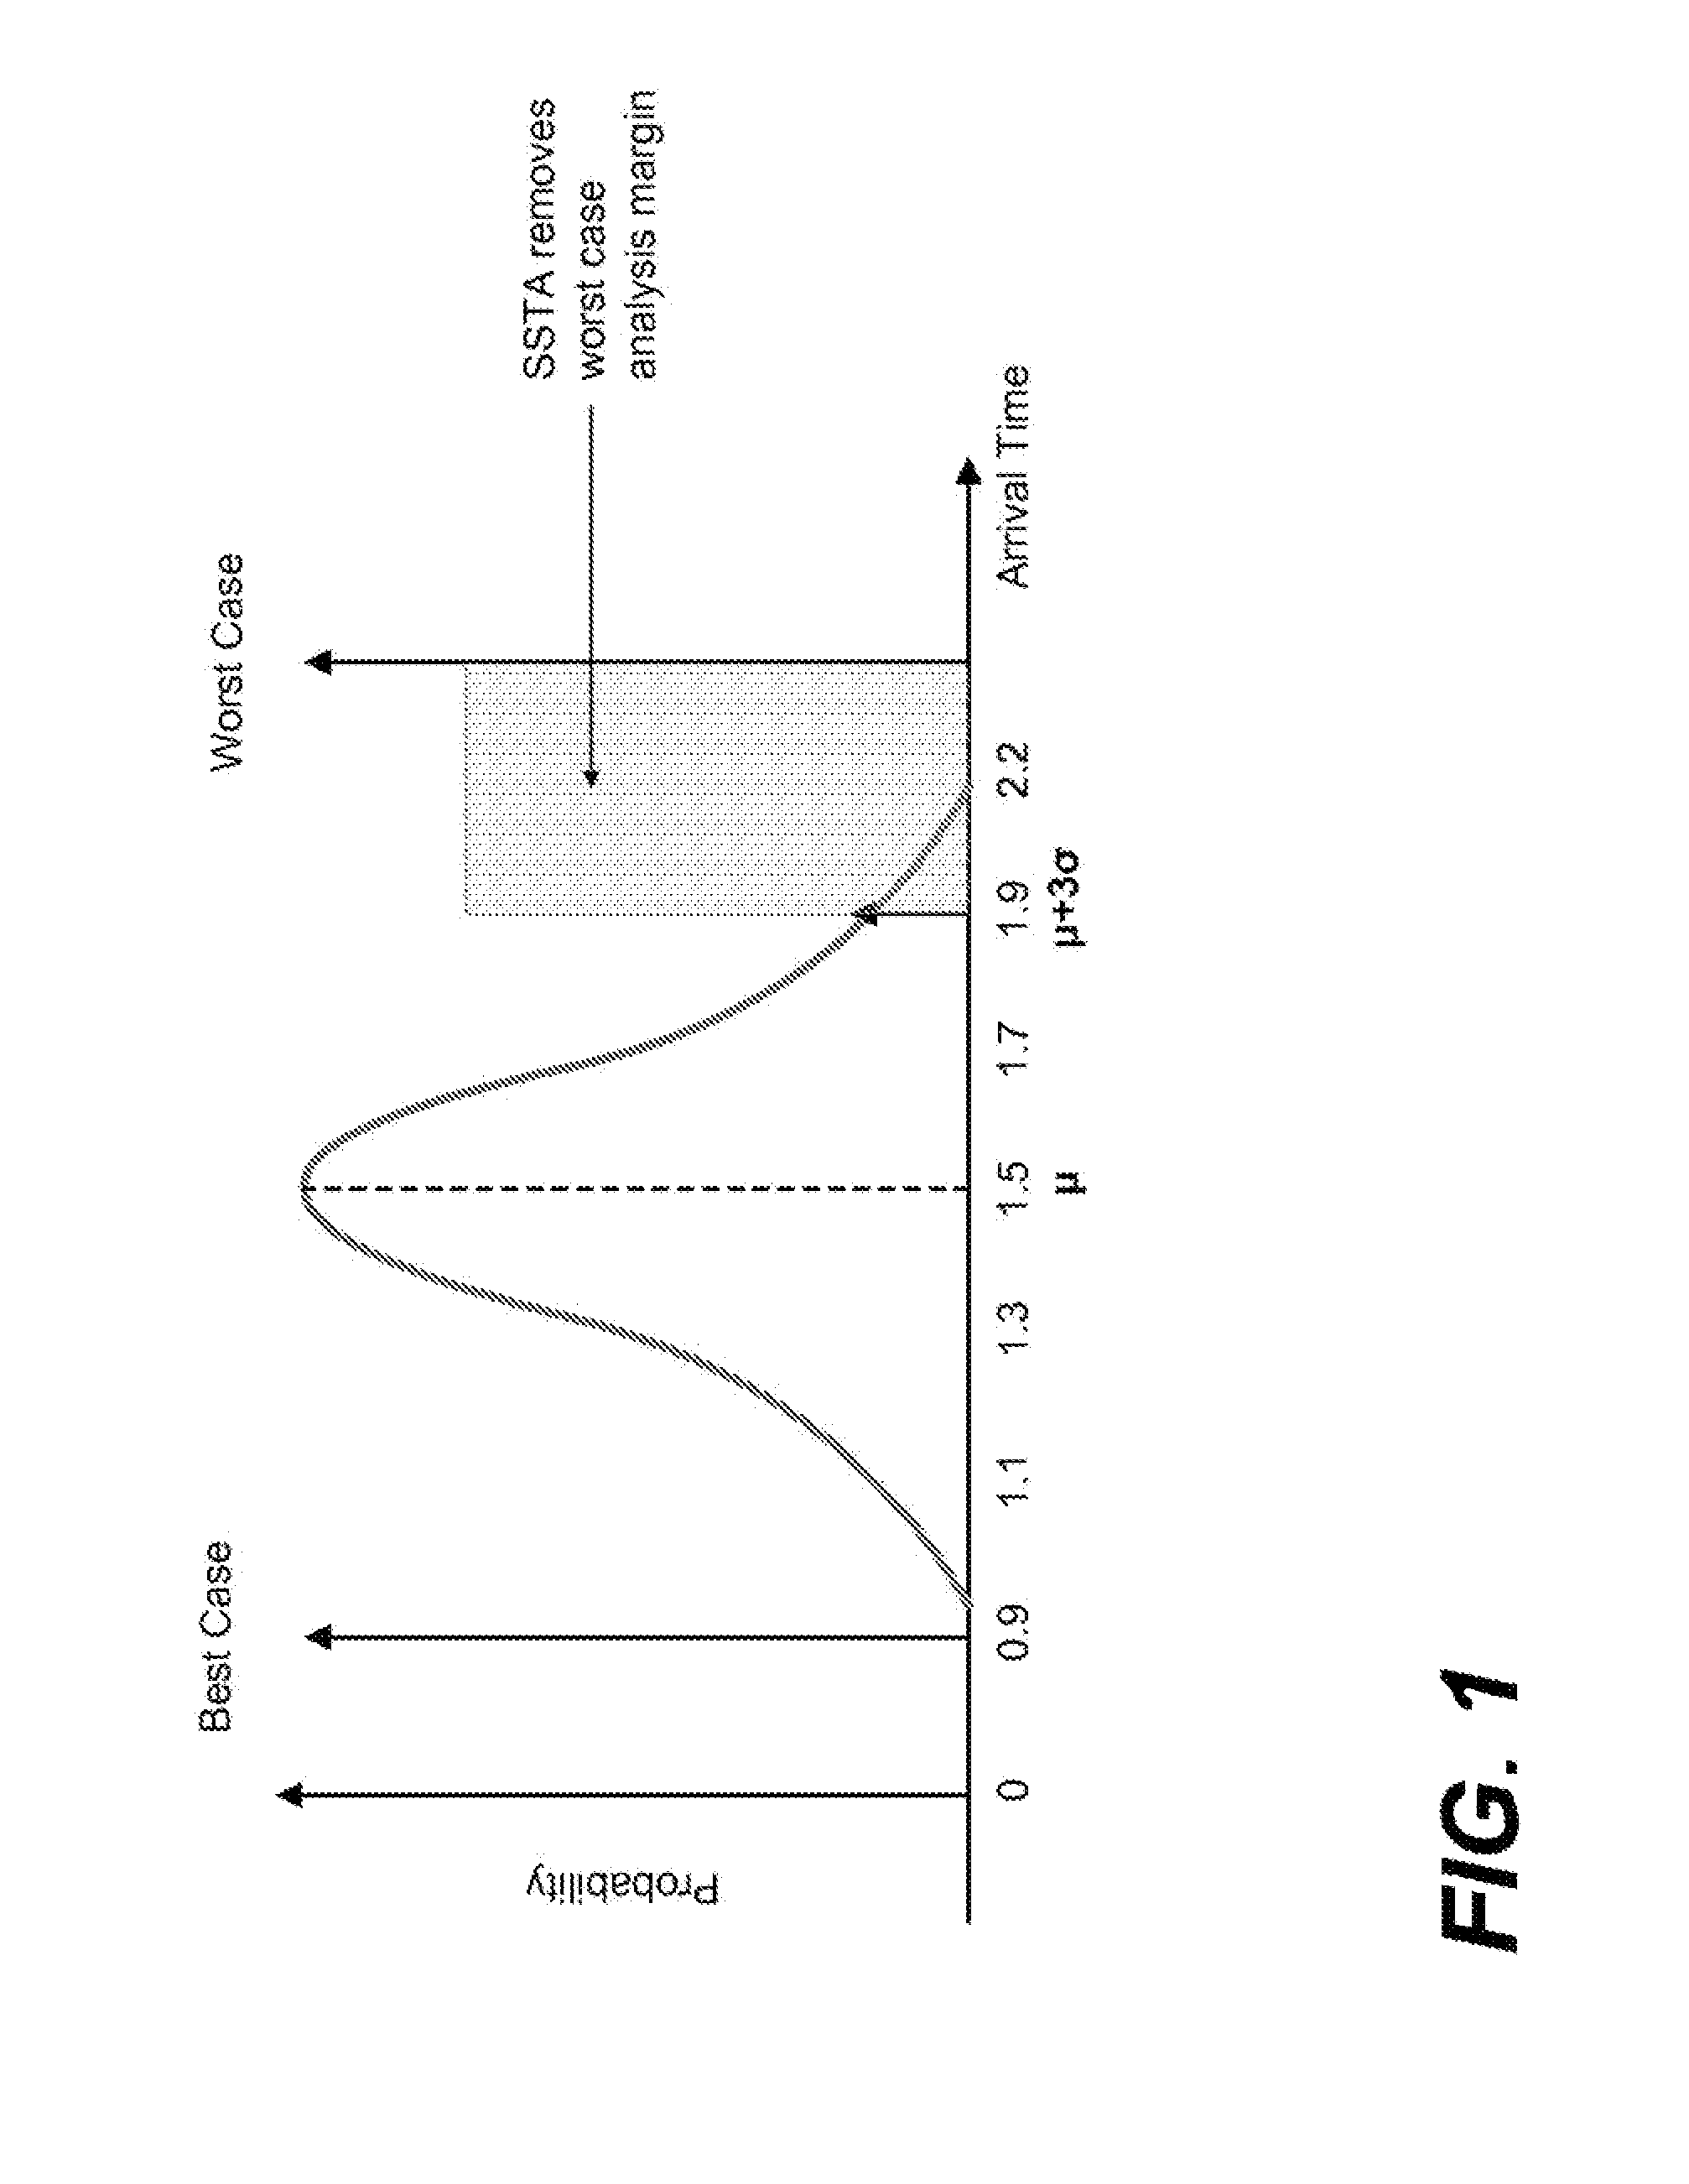 Statistical static timing analysis of signal with crosstalk induced delay change in integrated circuit